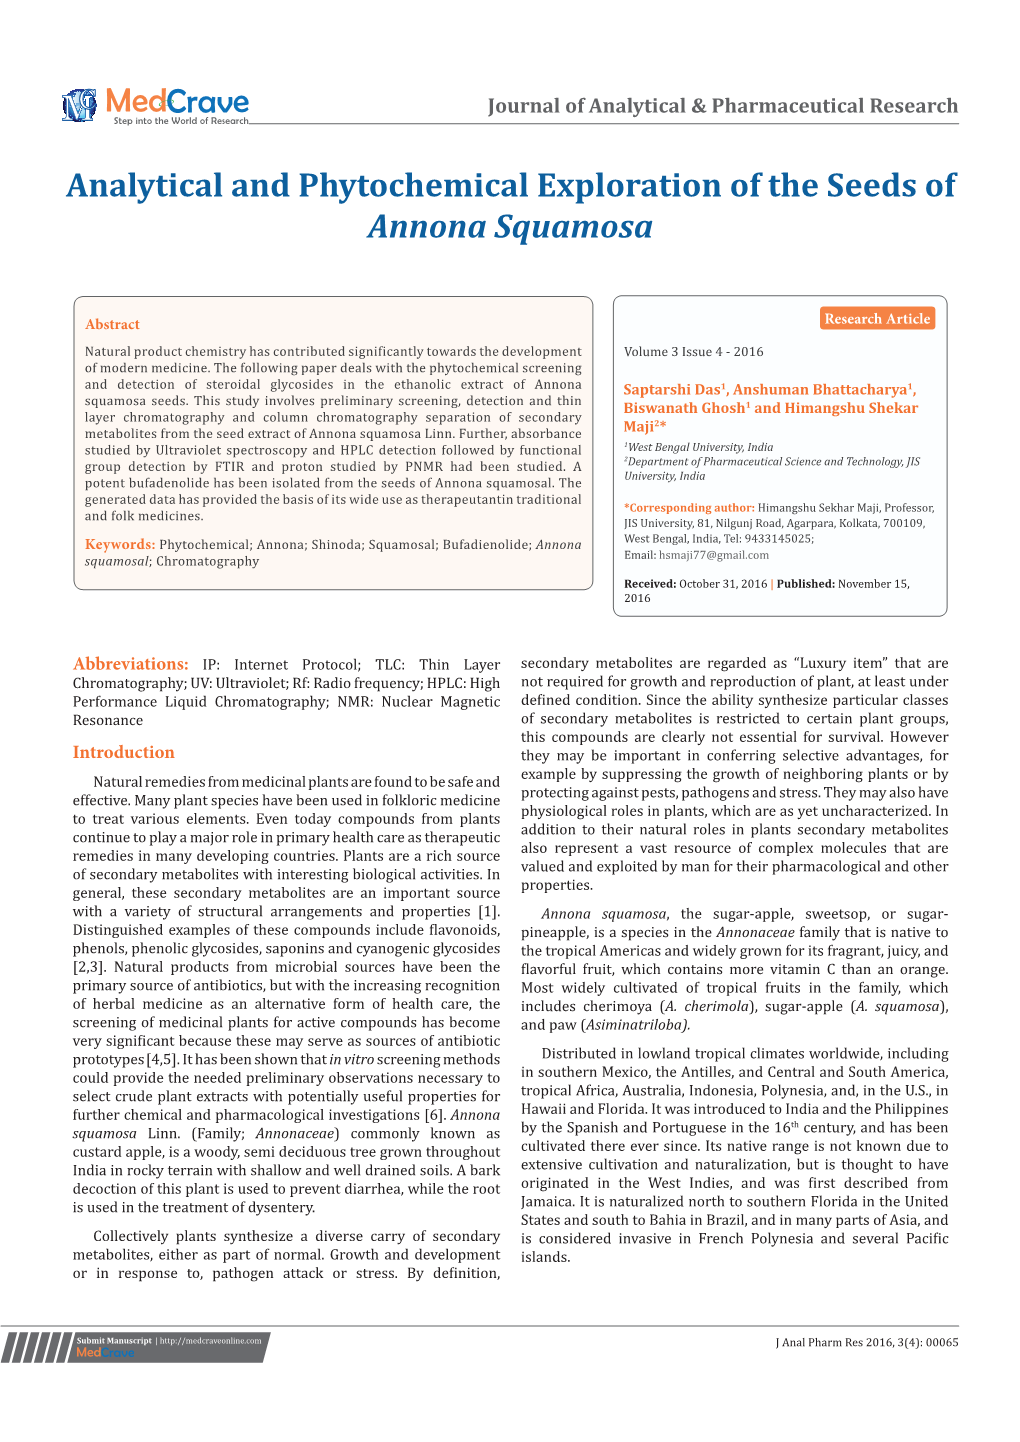 Analytical and Phytochemical Exploration of the Seeds of Annona Squamosa